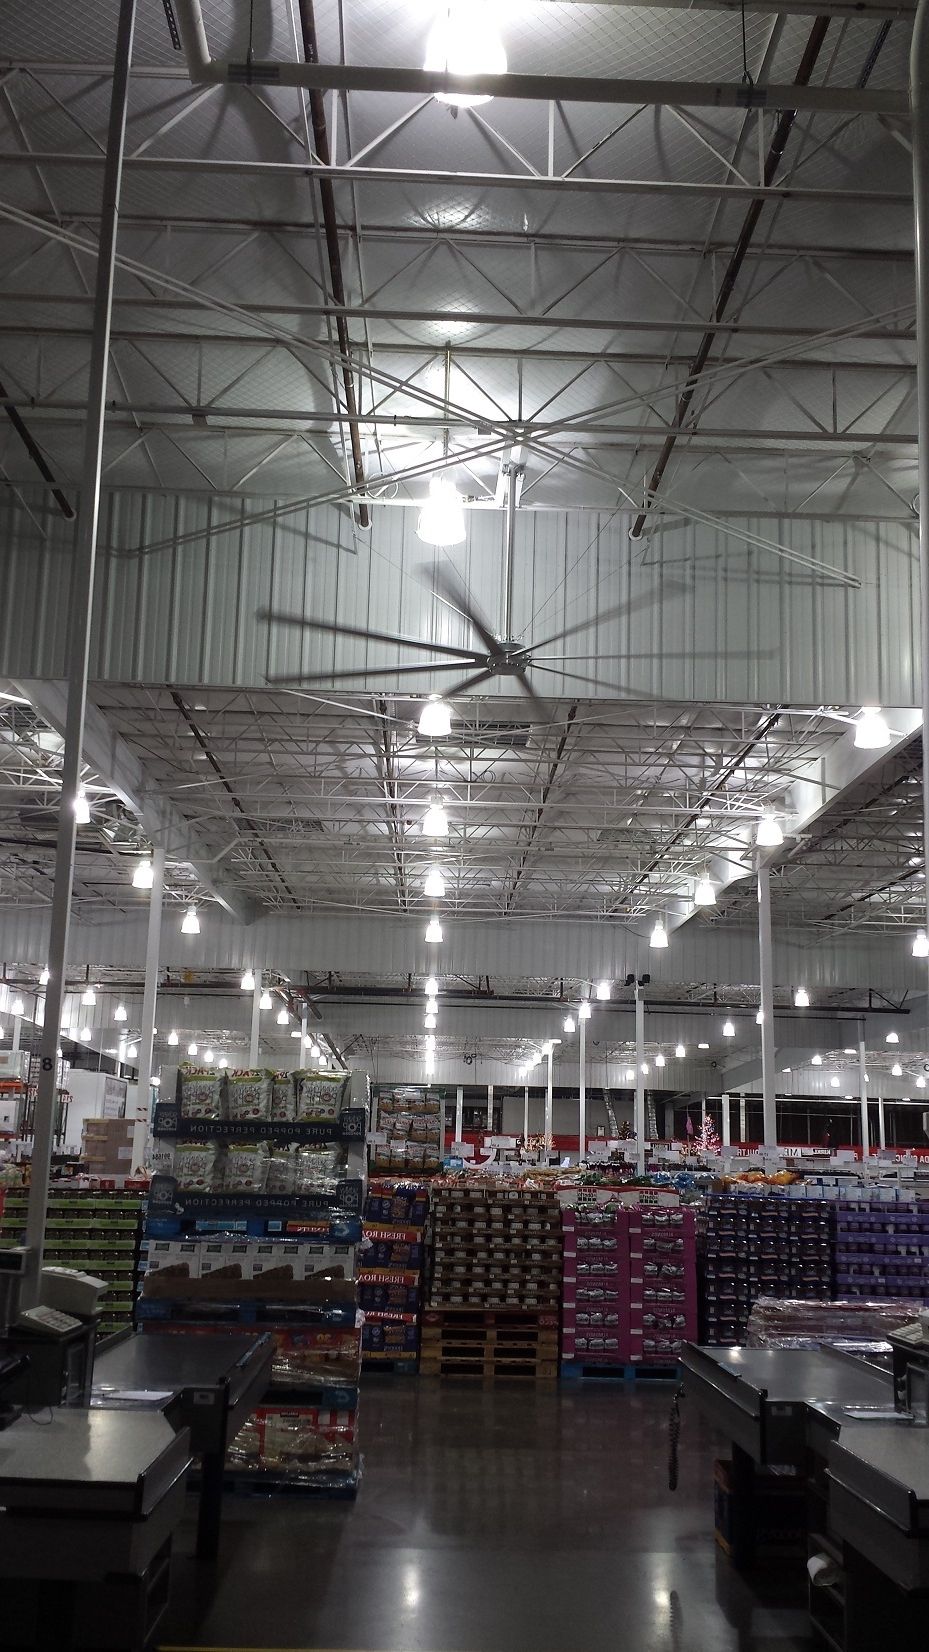 Outdoor Ceiling Fans At Costco Throughout Favorite Ceiling Fan: Astounding Costco Ceiling Fans For Home Hunter Ceiling (View 5 of 20)